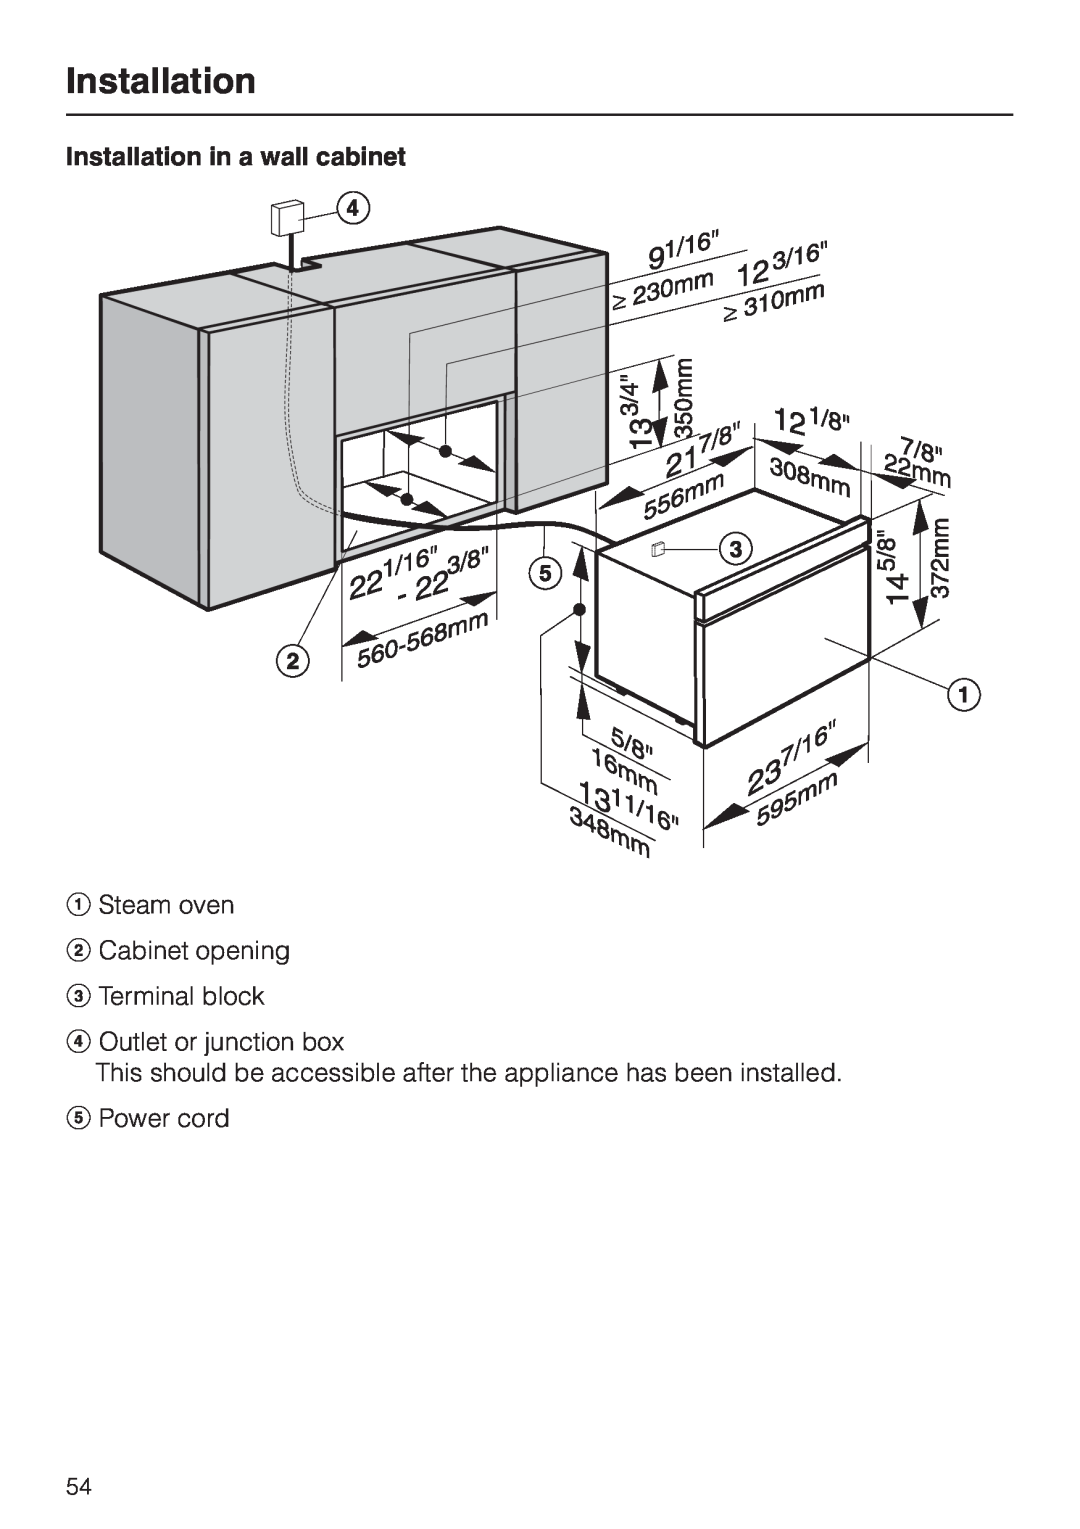 Miele DG 2661 installation instructions Installation in a wall cabinet 